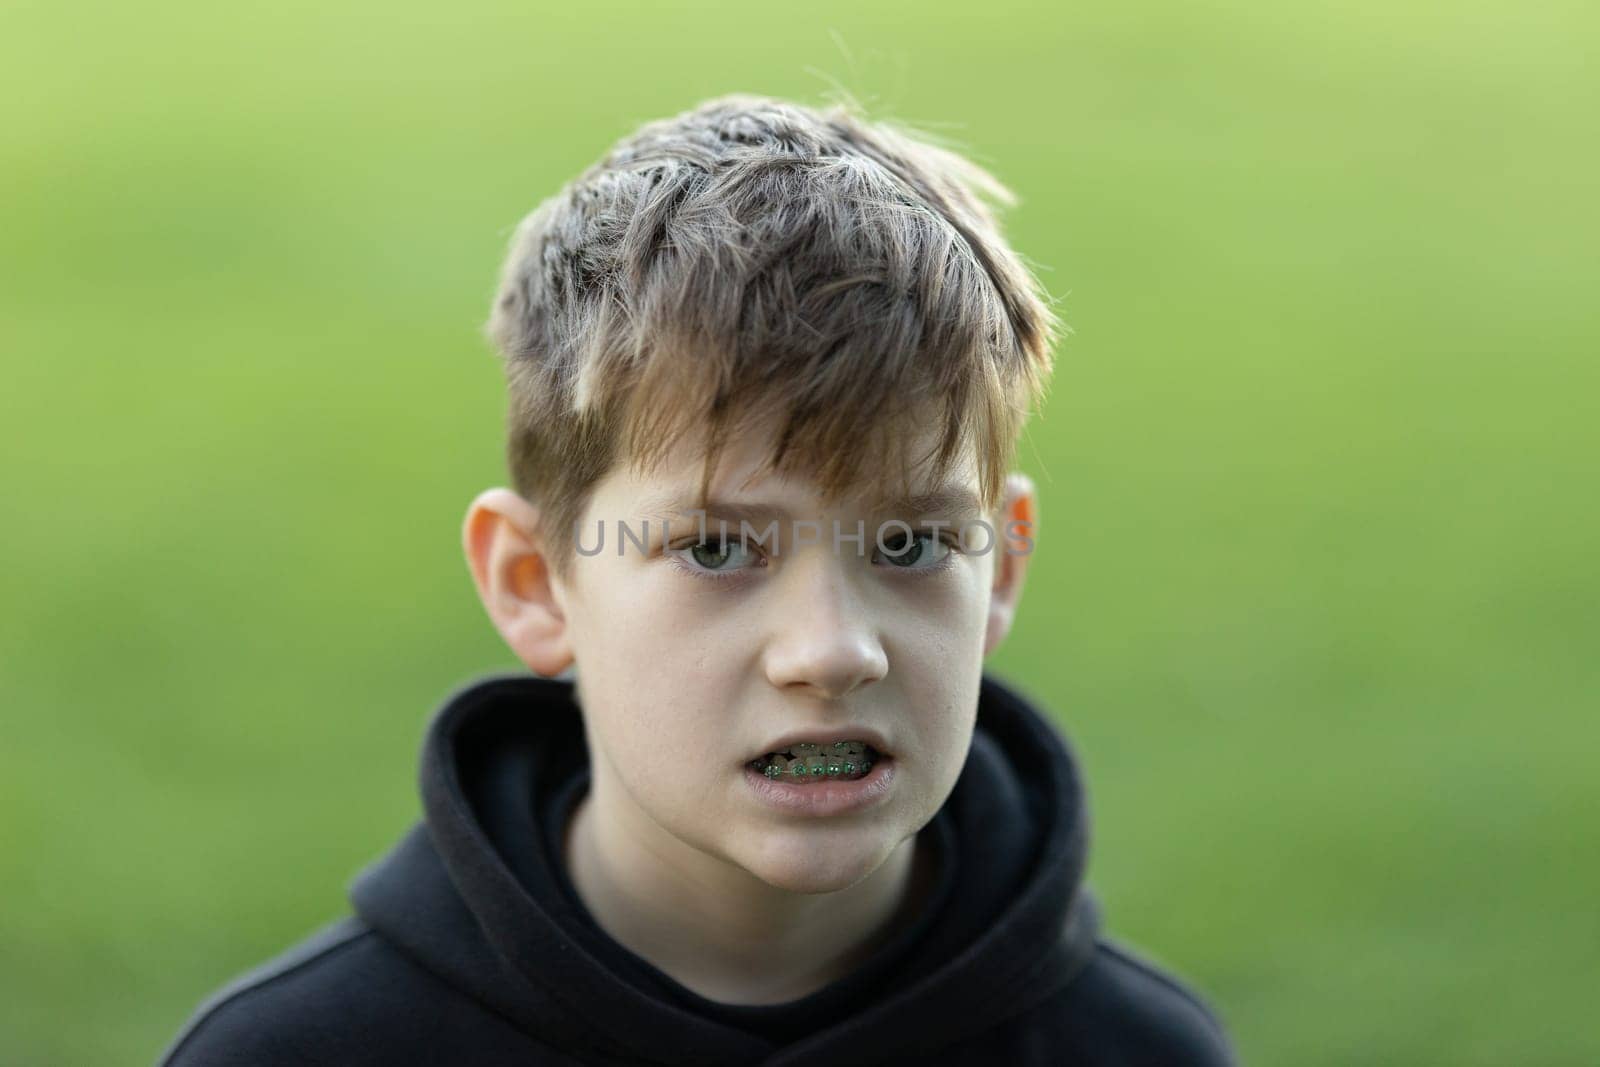 A boy with braces and a black hoodie is looking at the camera. The boy's mouth is open, and he has a serious expression on his face